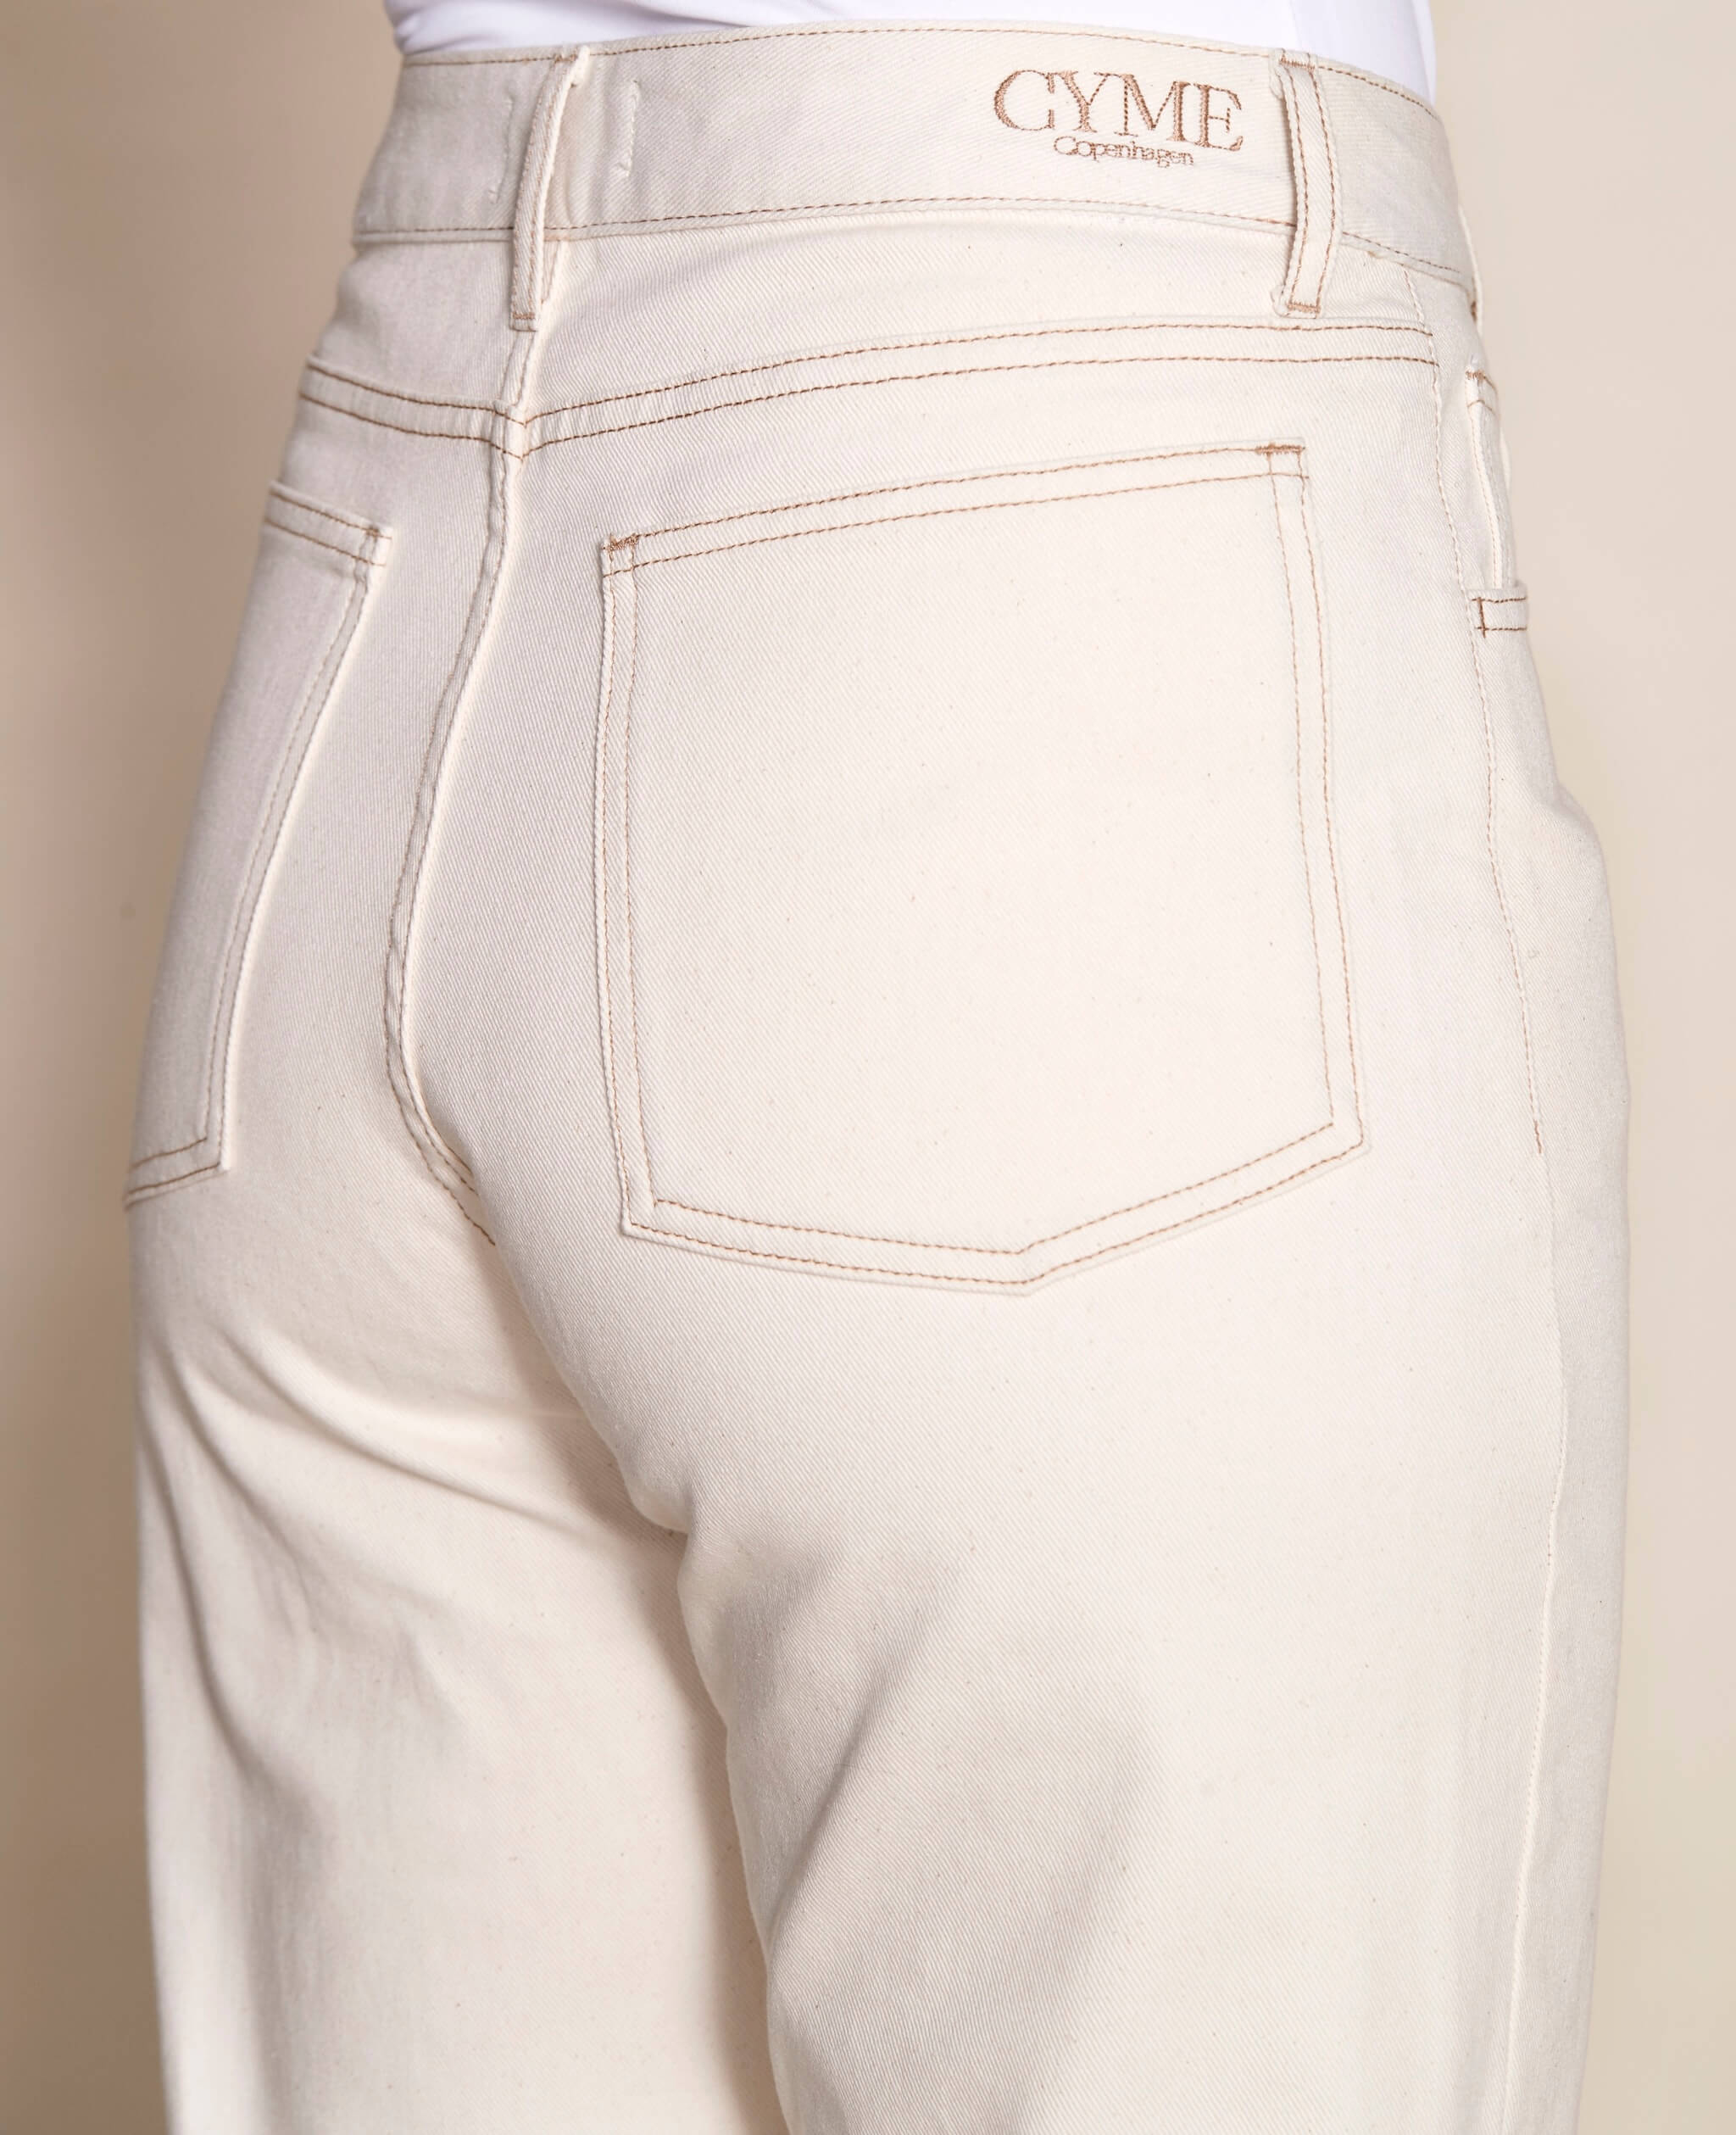 Detail of Cyme Copenhagen's cream denim pants, focusing on the back pocket with branded tag, emphasizing the brand's quality craftsmanship and ethical fashion standards in Denmark's clothing shops.